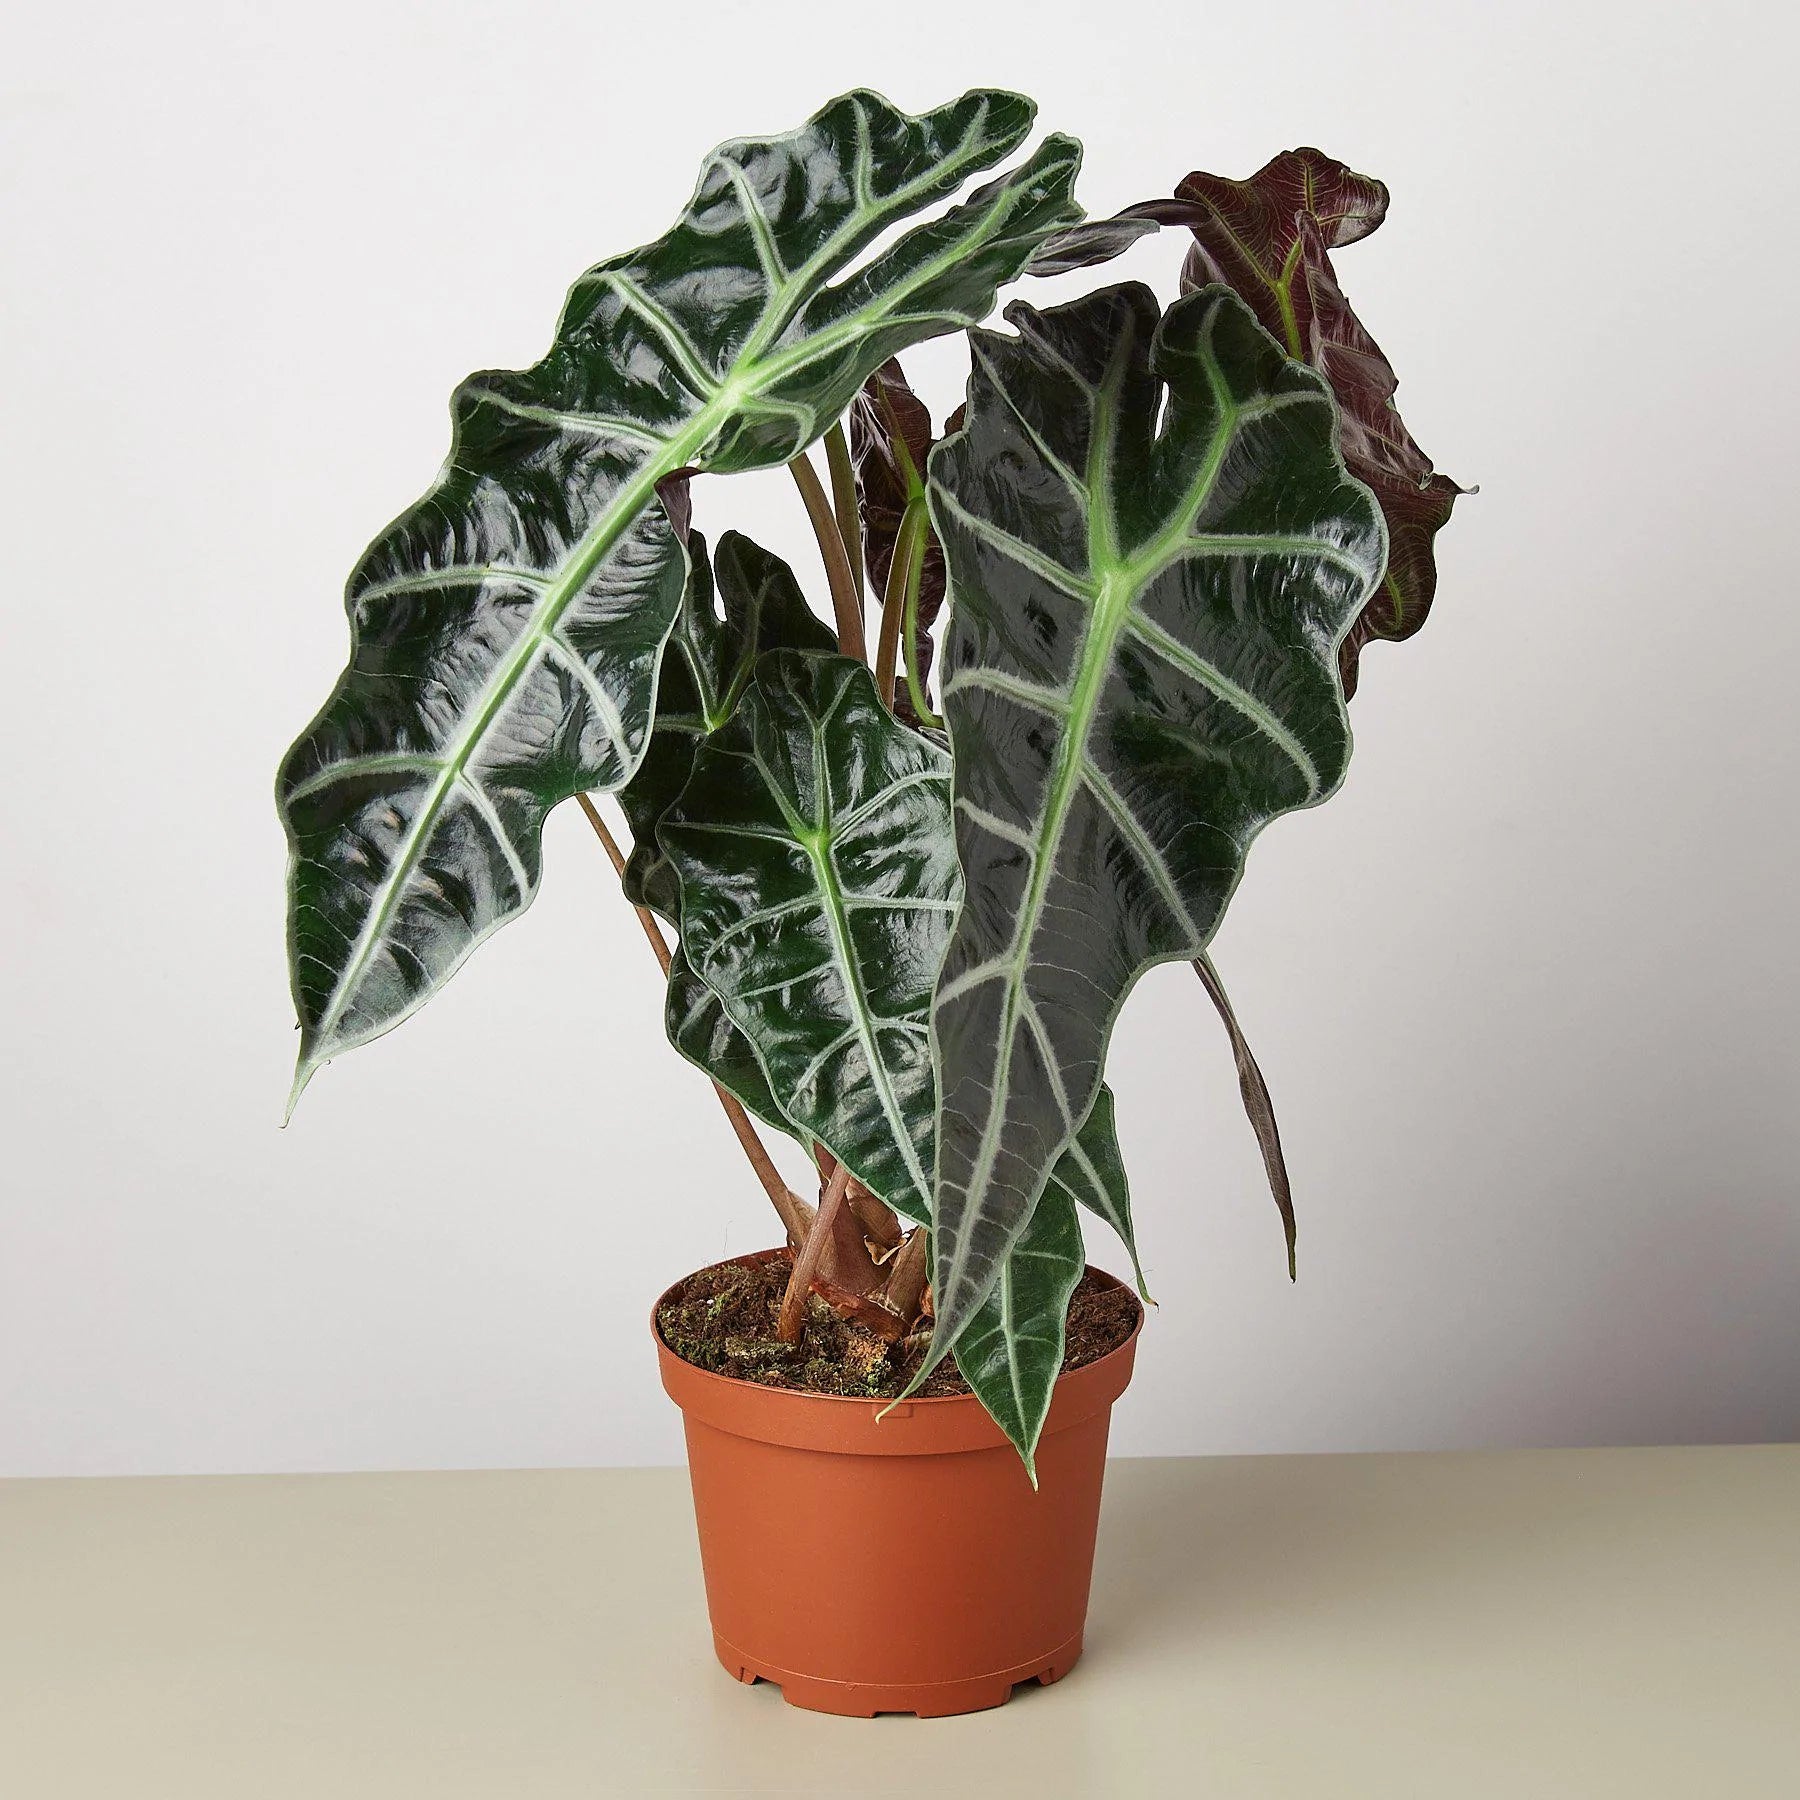 Alocasia Polly 'African Mask' Care Guide